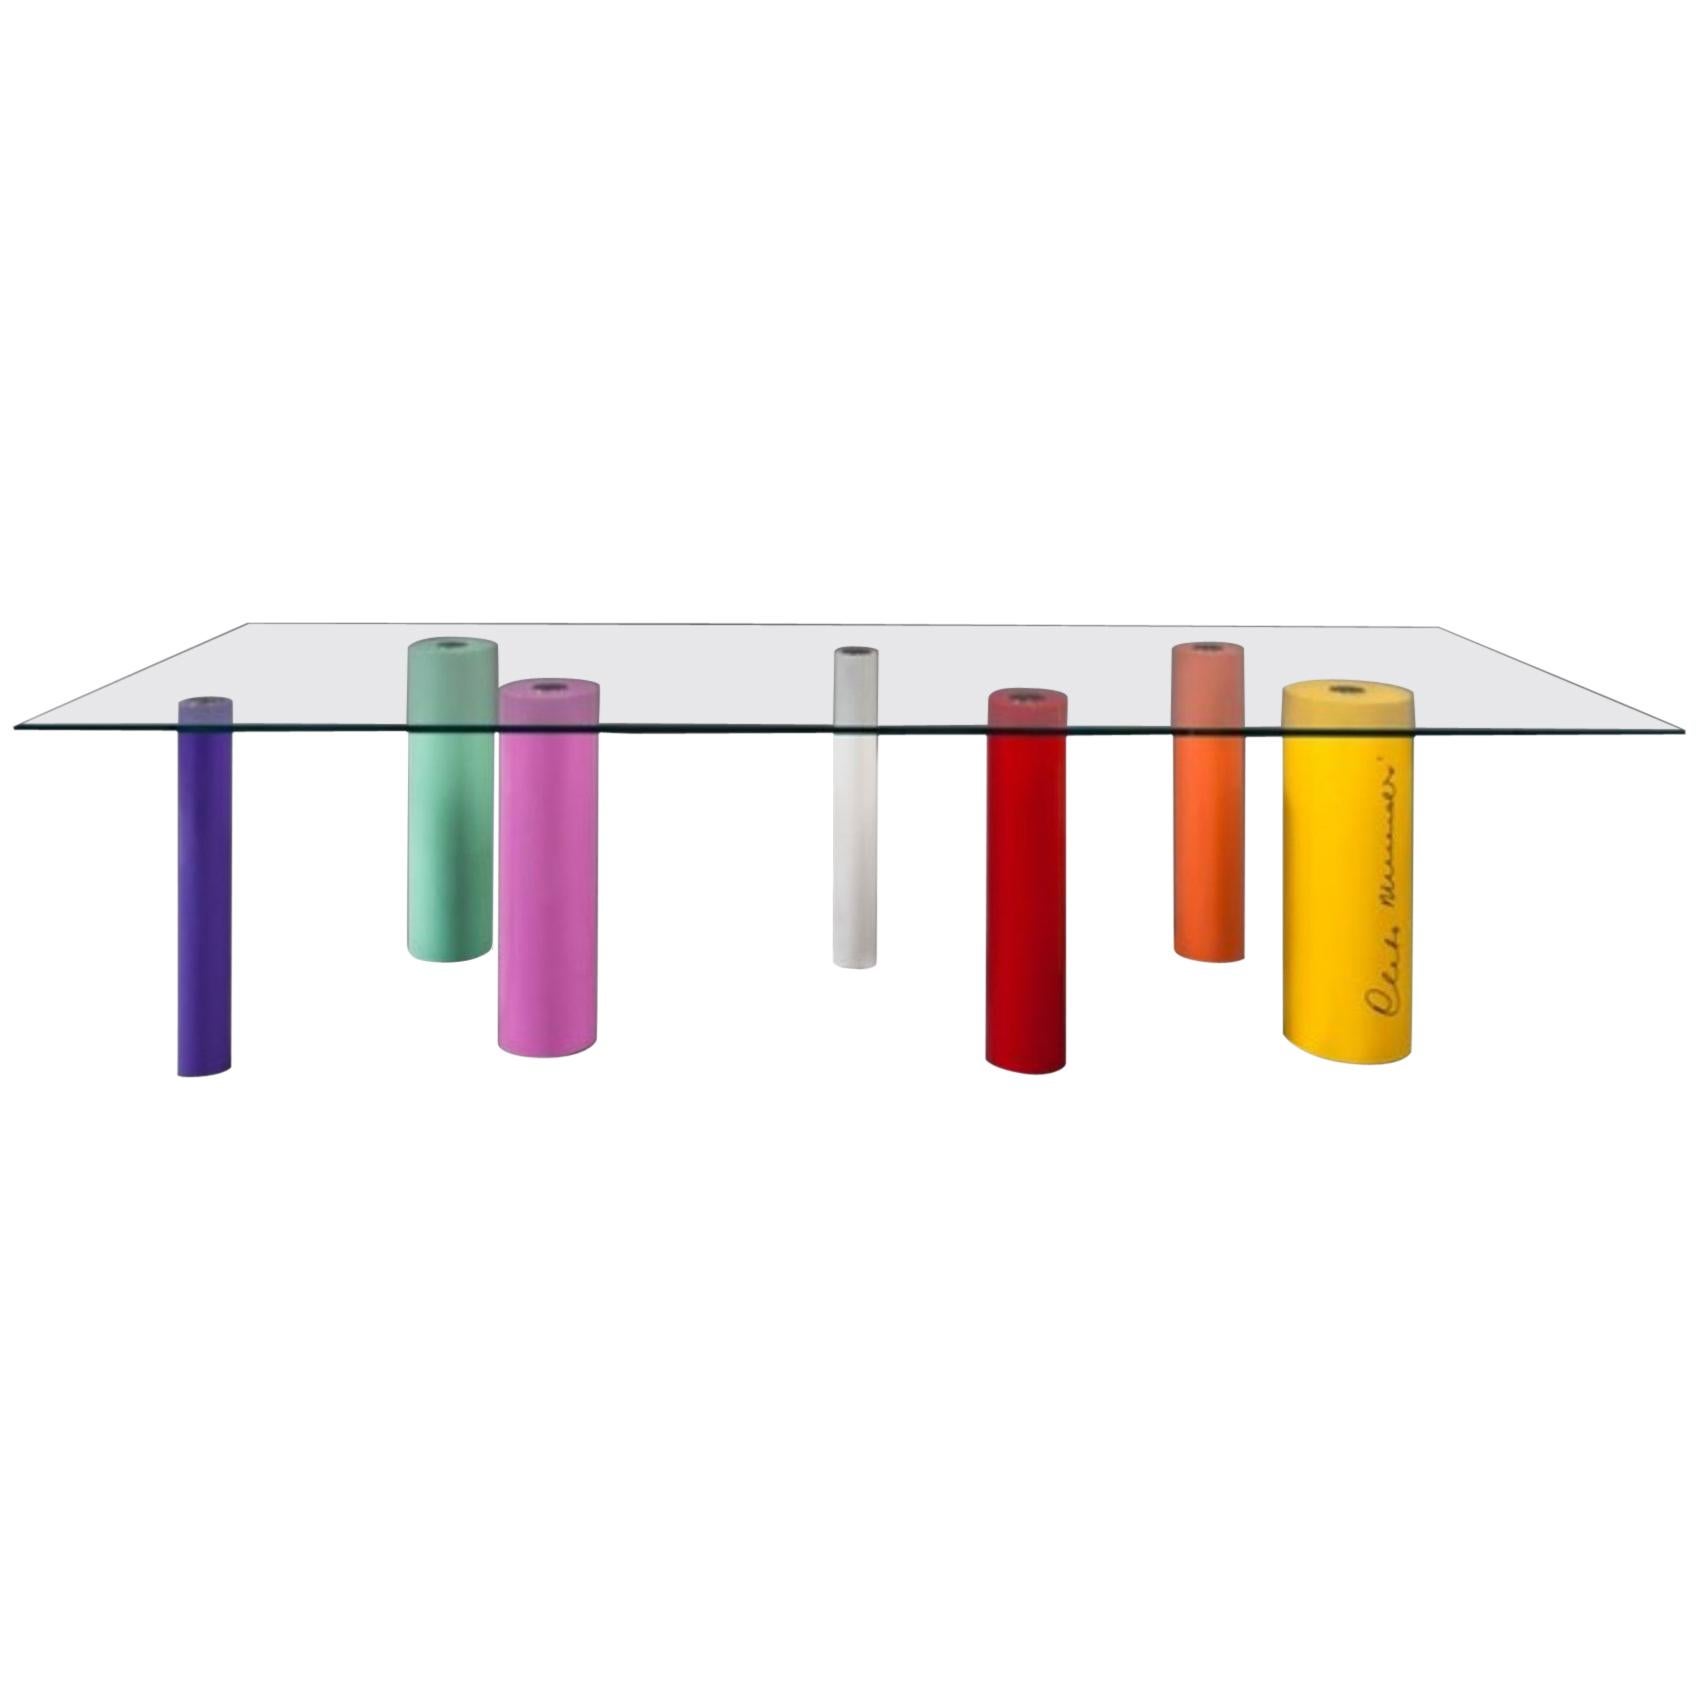 'Palafitte' Table by Cleto Munari, 2008, Limited Edition 99 Example For Sale